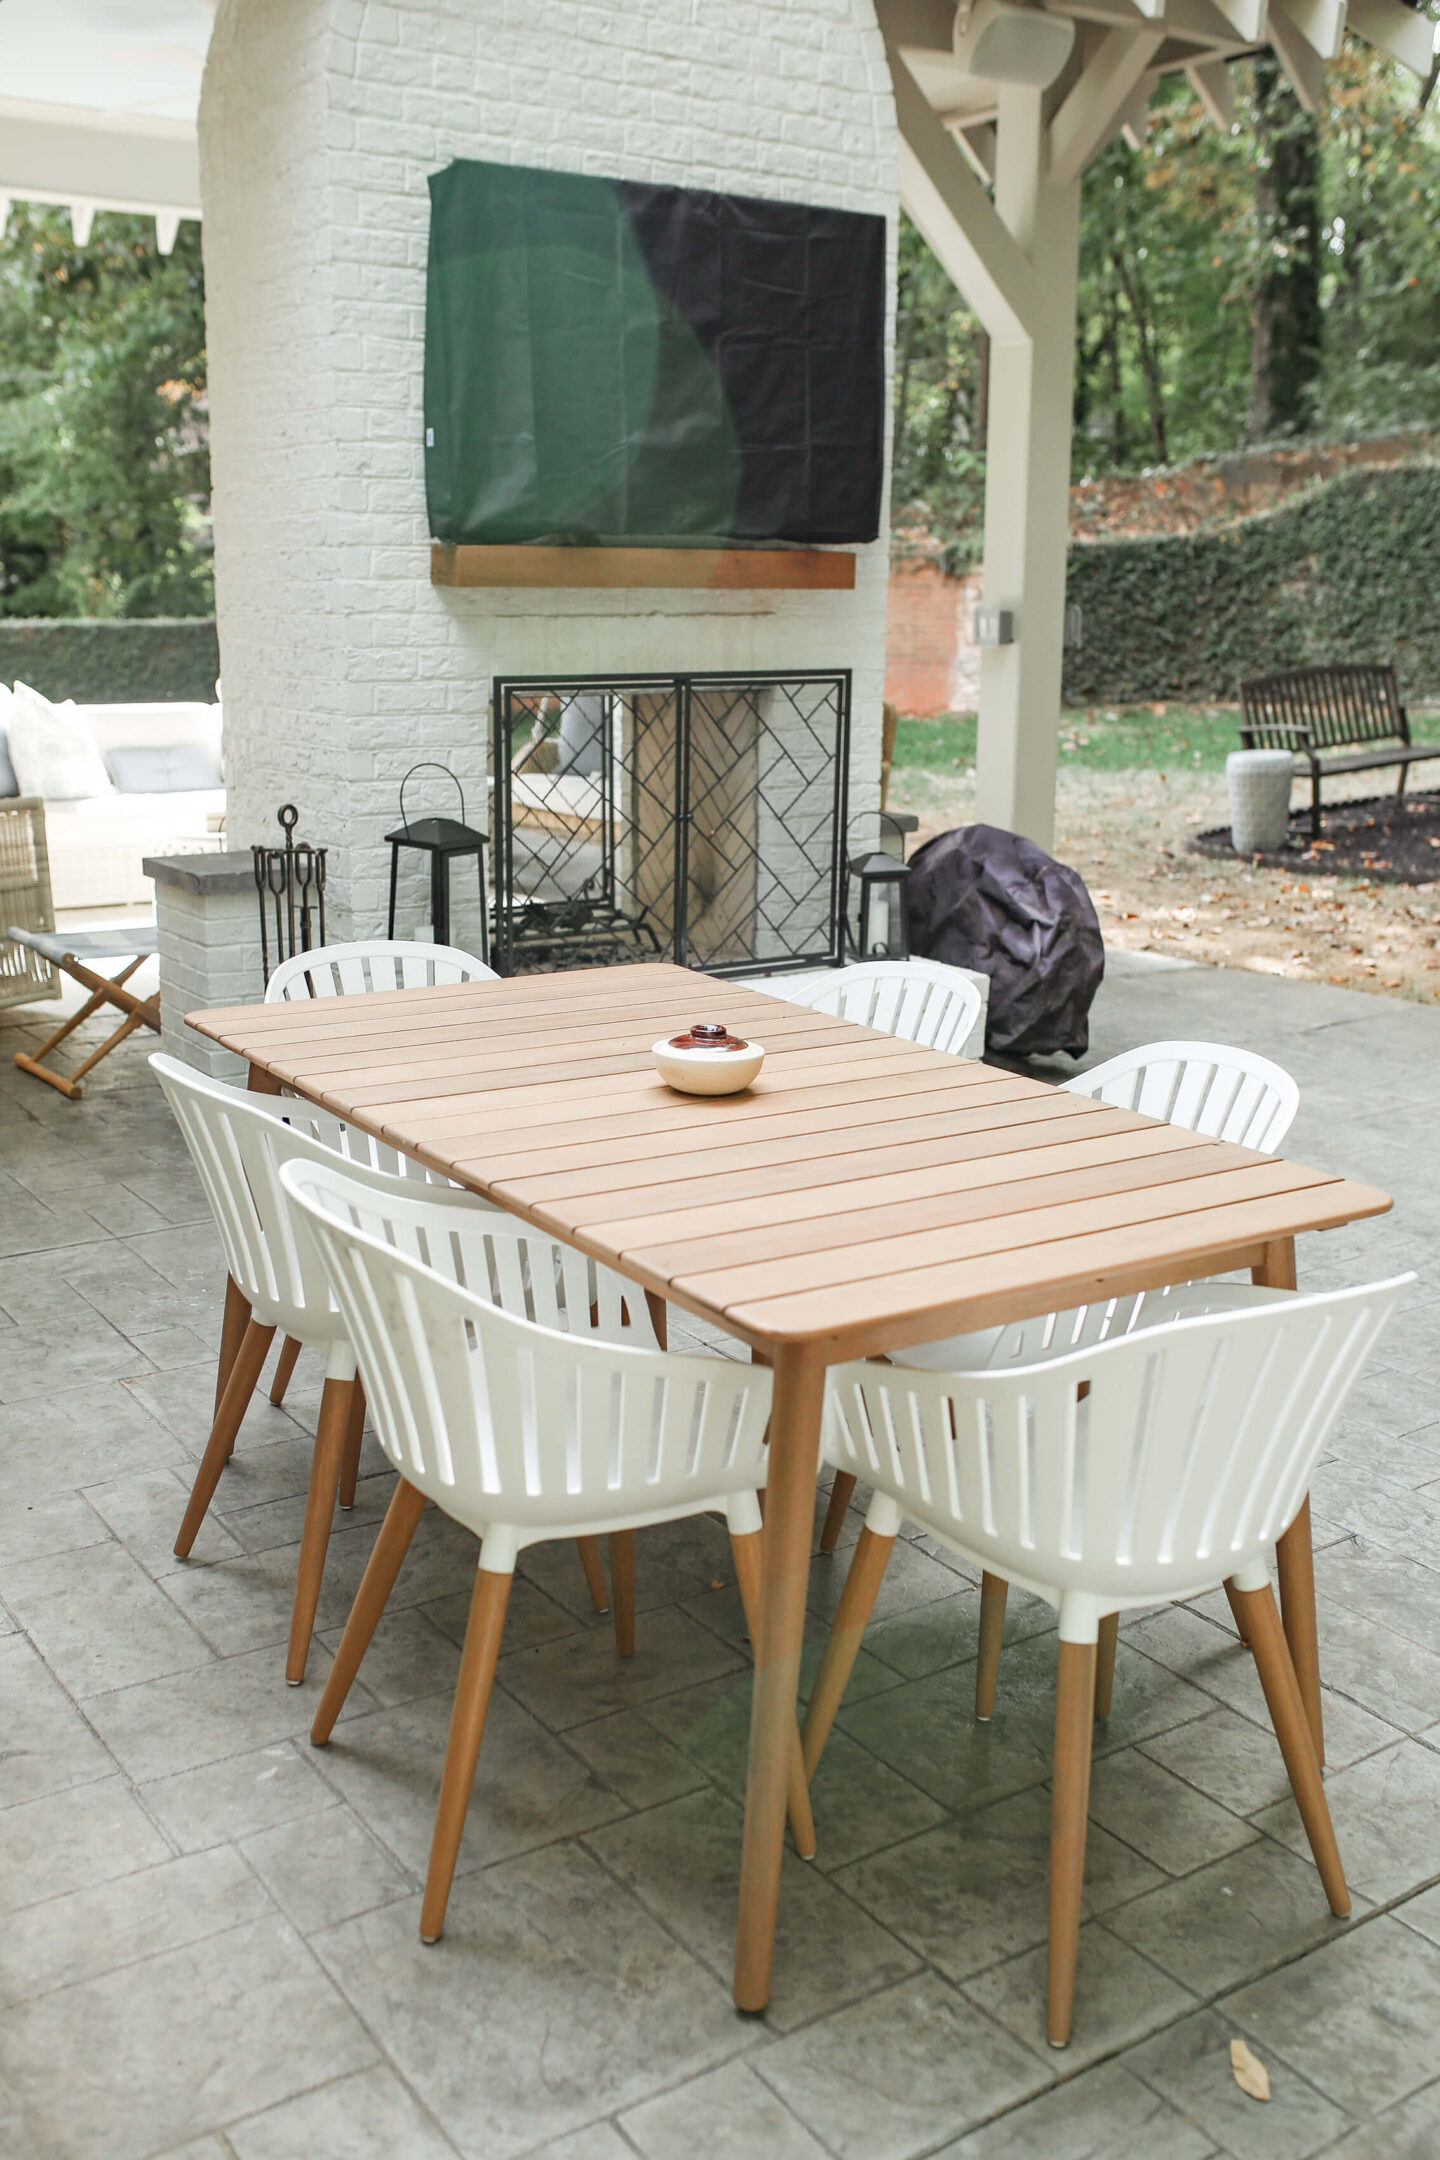 brown outdoor dining table with white dining chairs and outdoor fireplace in background